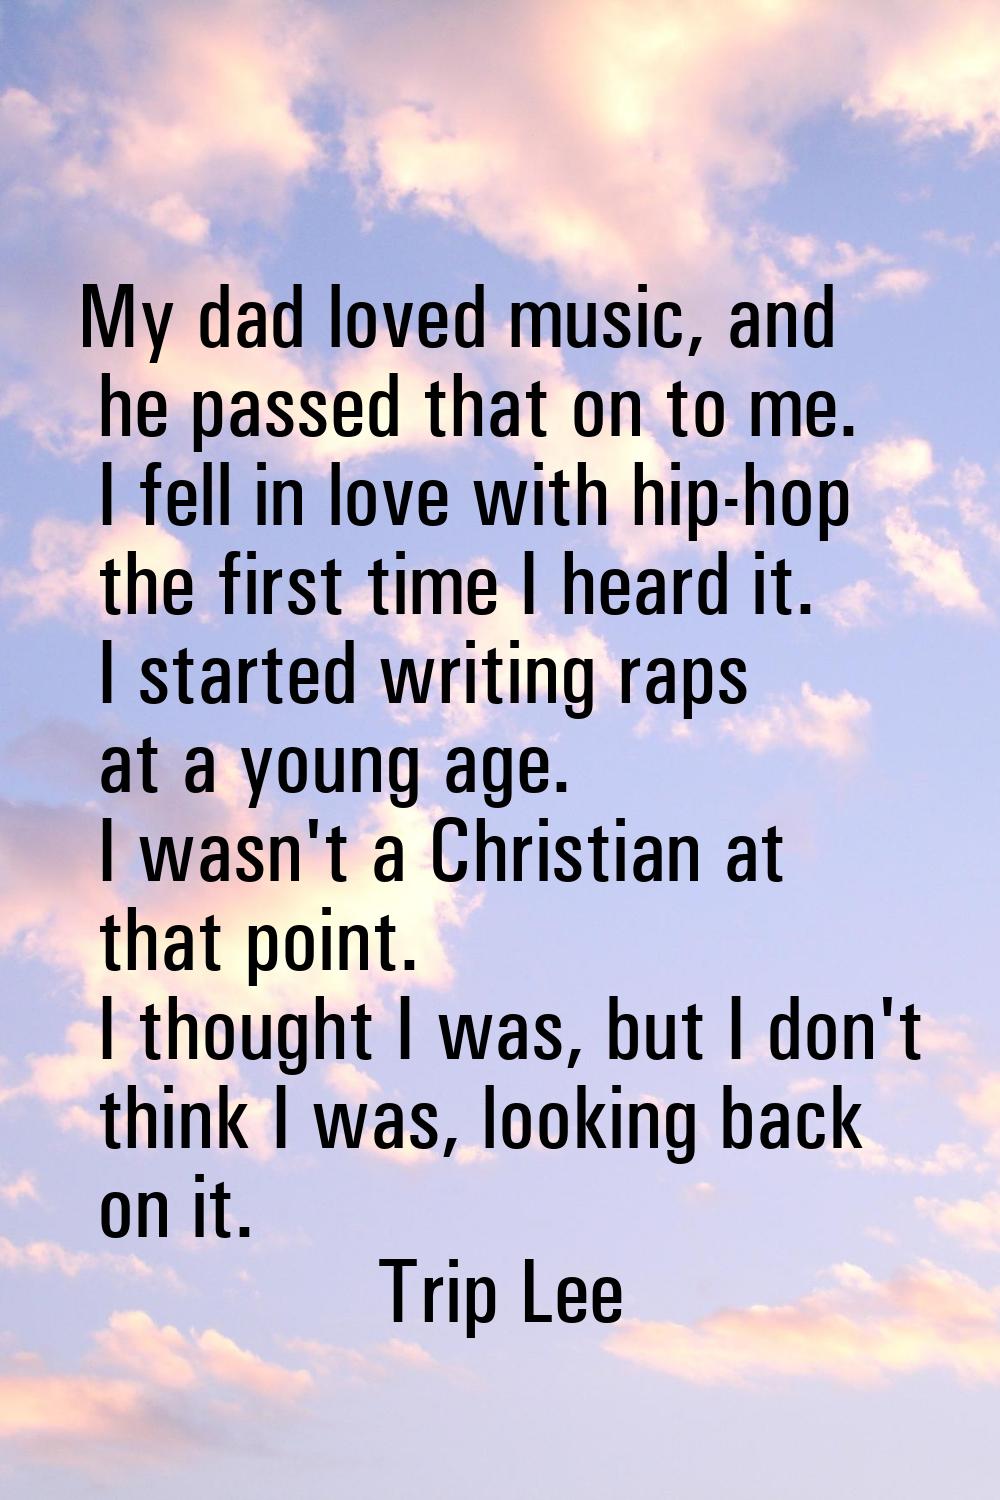 My dad loved music, and he passed that on to me. I fell in love with hip-hop the first time I heard